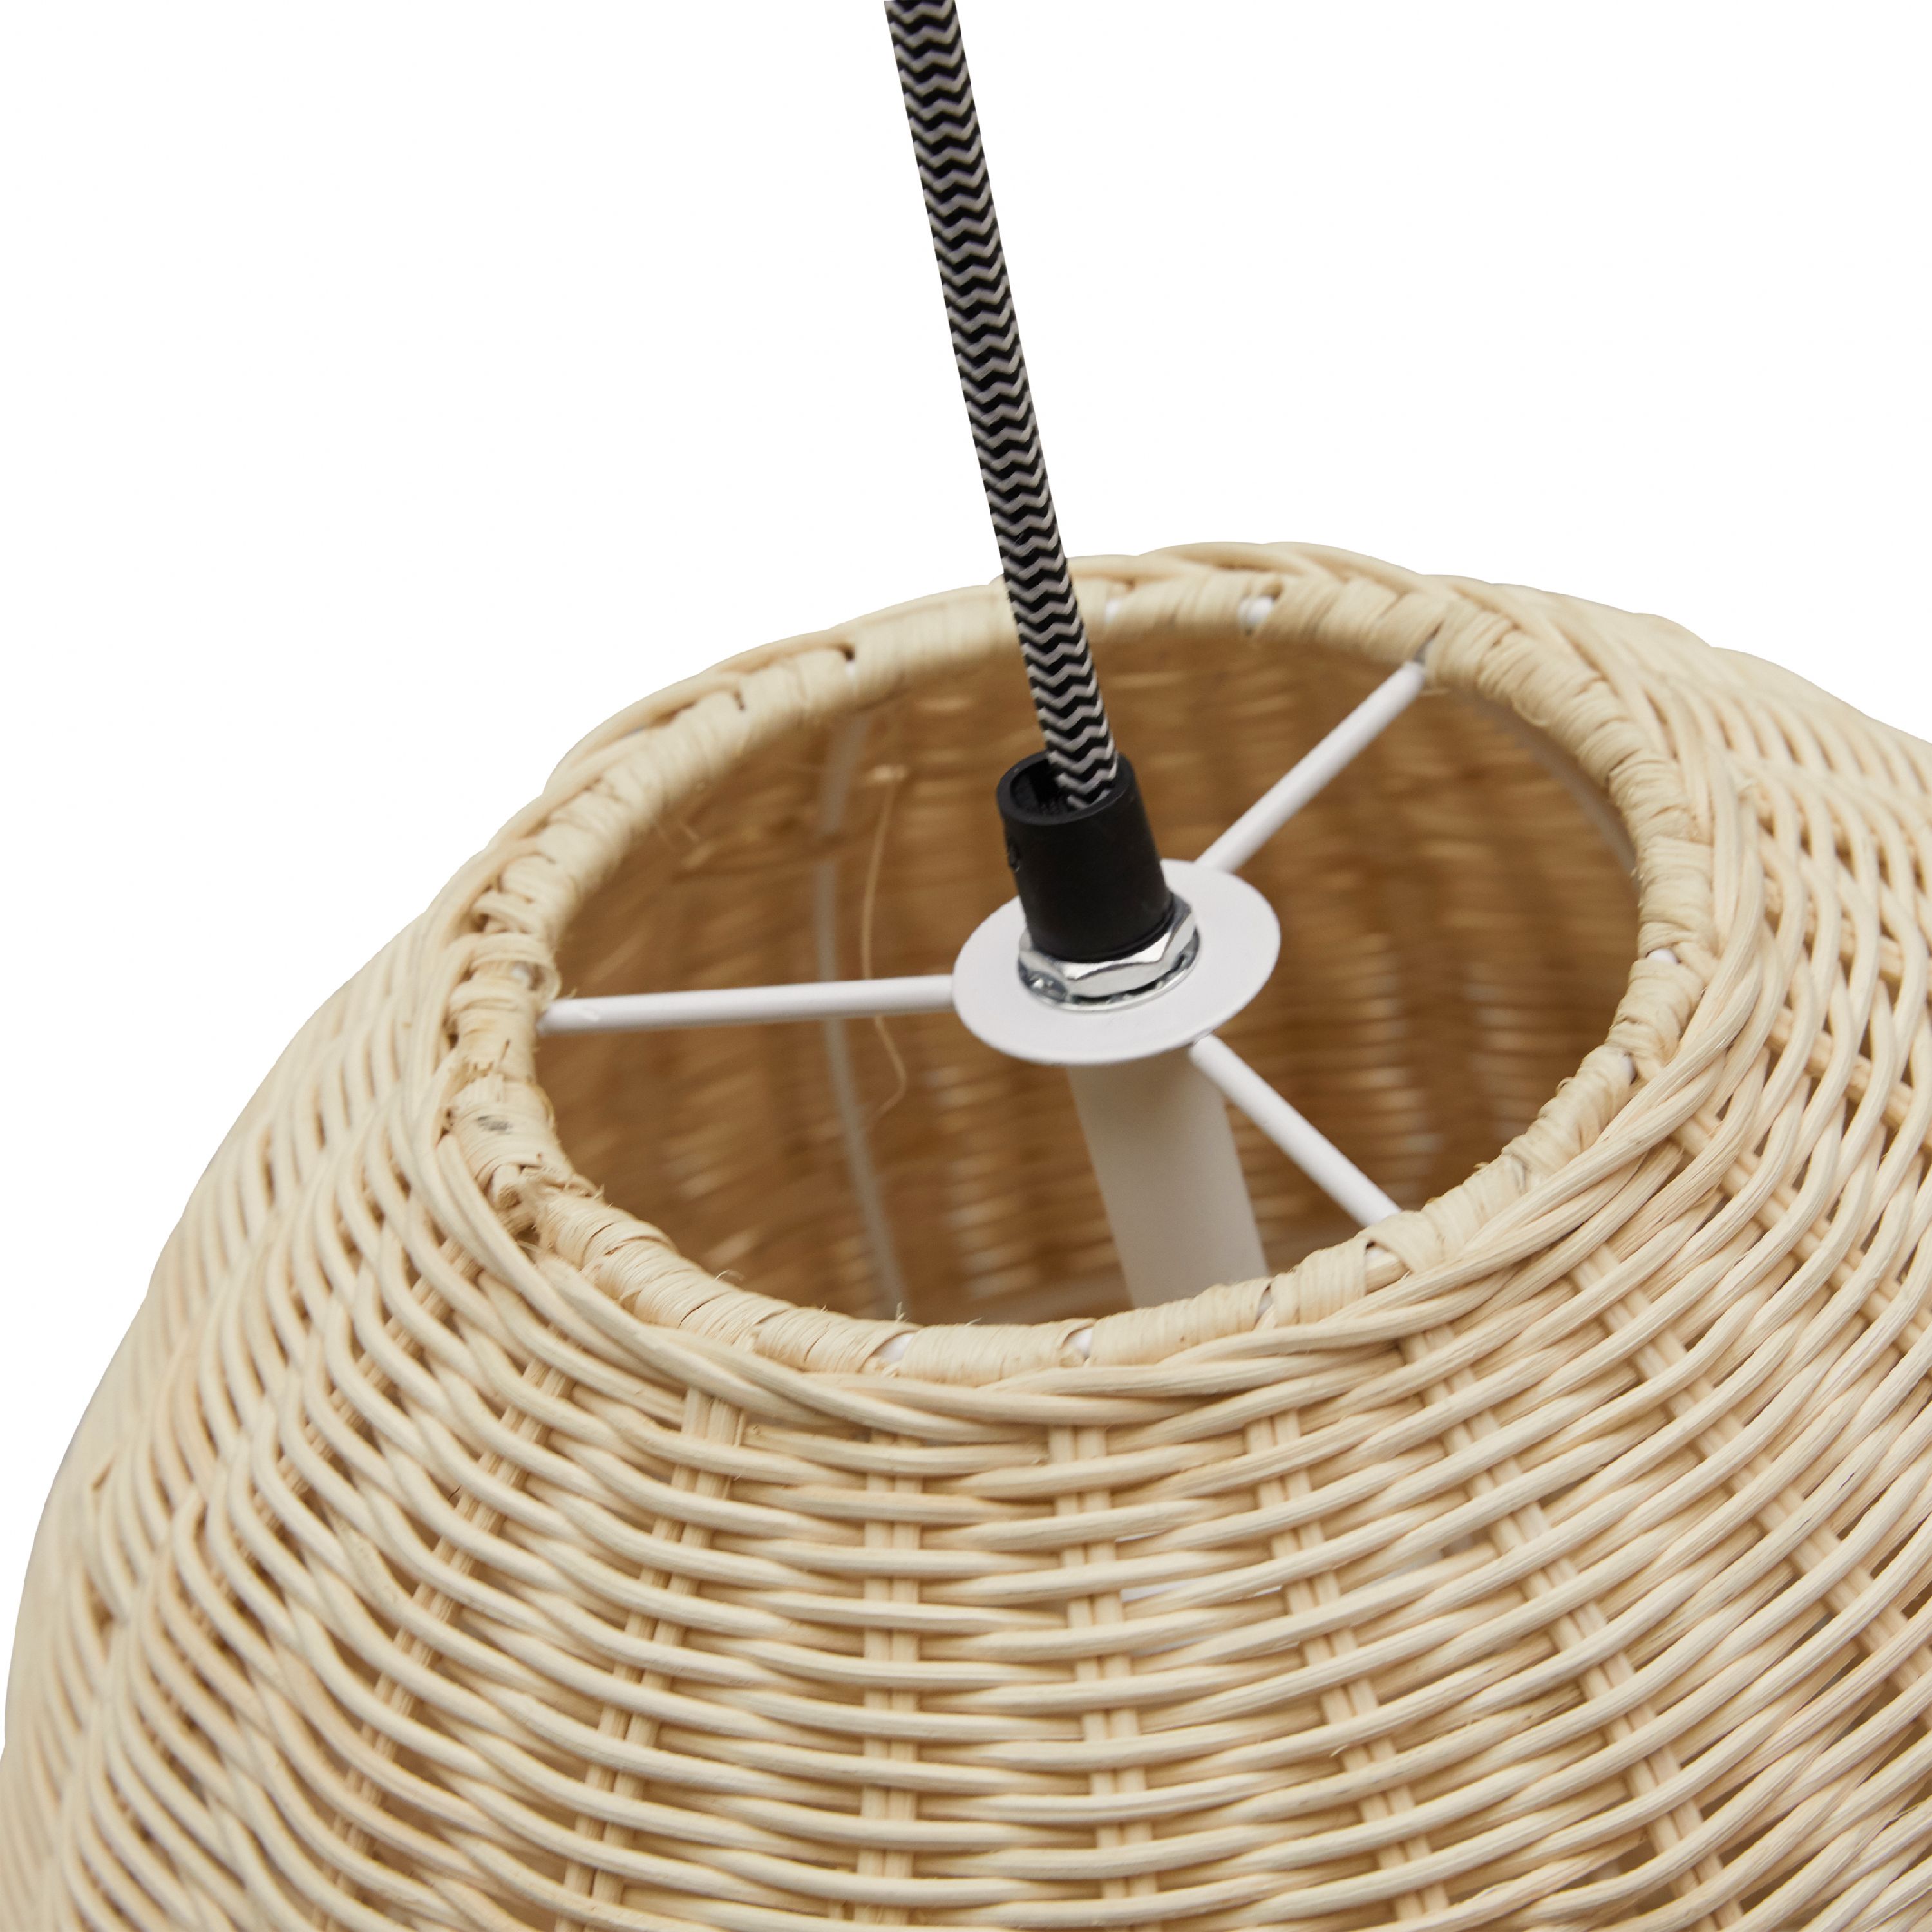 Rattan Pendant Light by Drew Barrymore Flower Home - image 4 of 7